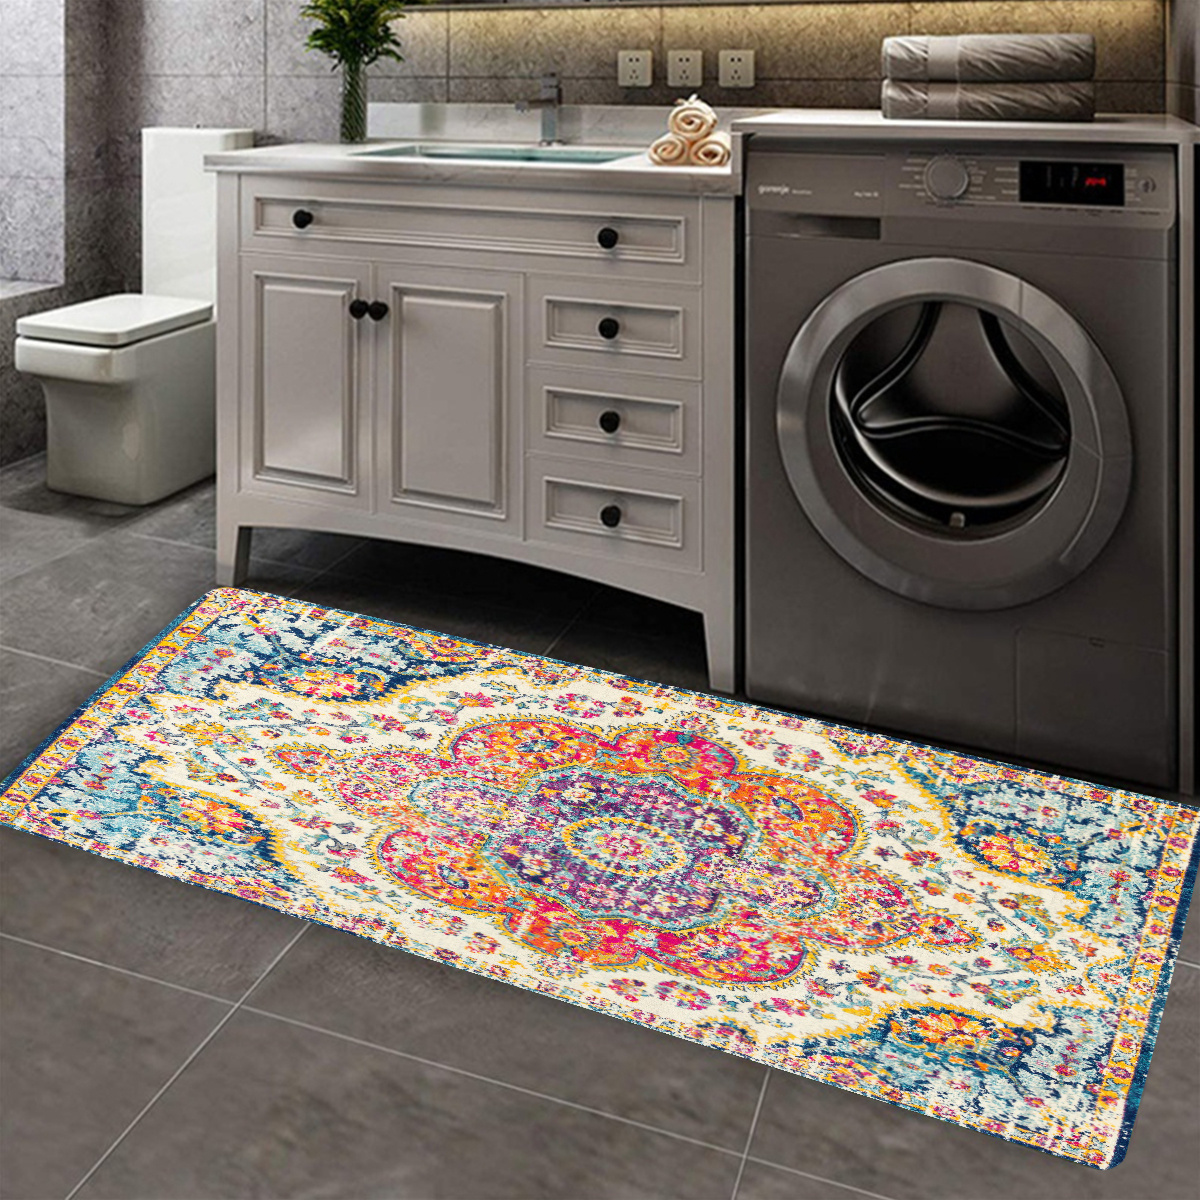  Joisal Traditional Asian Pattern Bath Floor Mats, Machine  Washable Threshold Bath Mats, Absorbent Runner Rugs with Rubber Backing, 39  x 20 Inches : Home & Kitchen